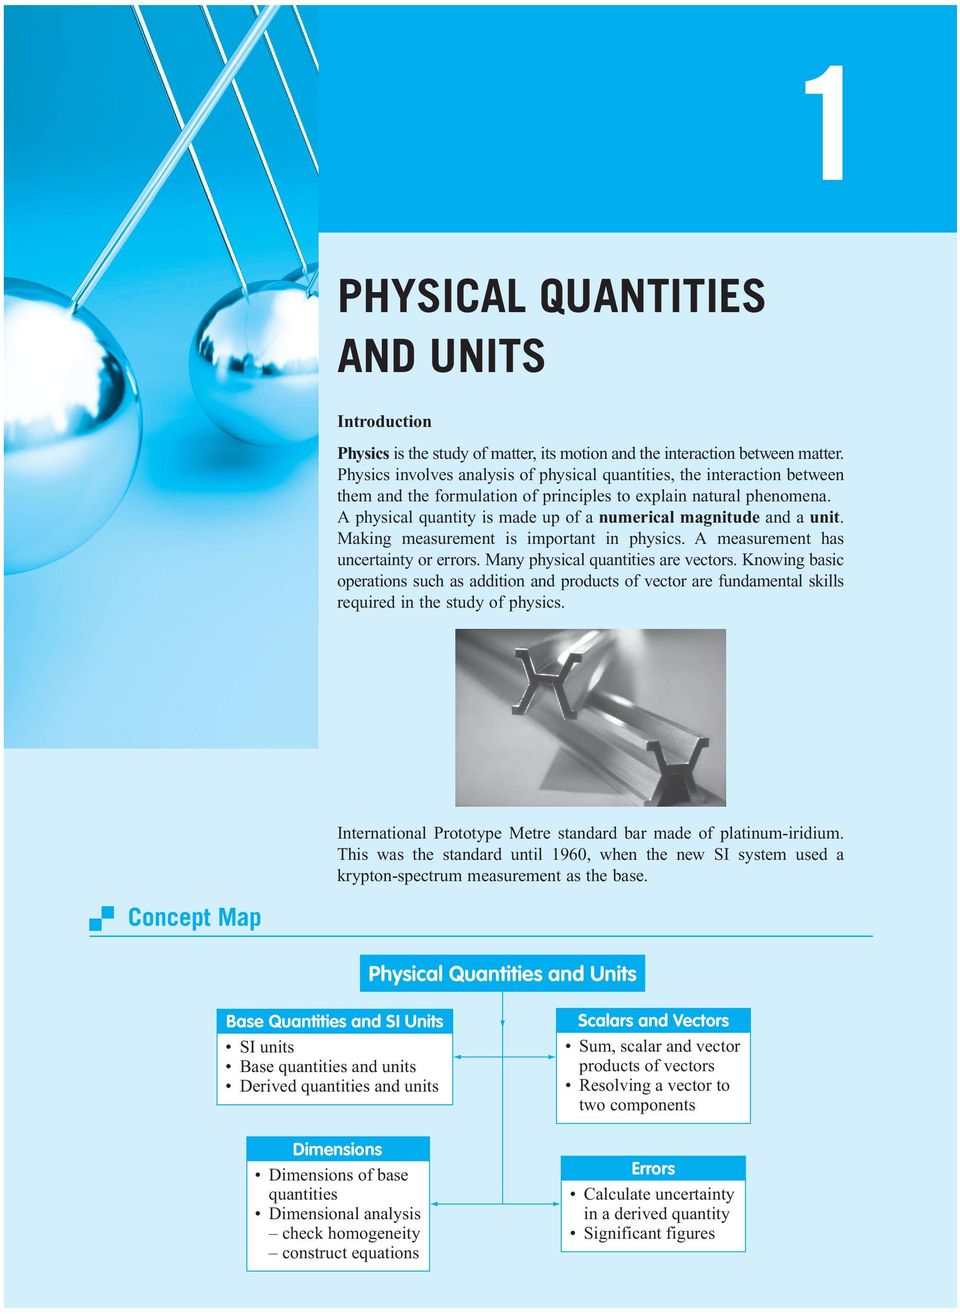 A physical quantity is made up of a numerical magnitude and a unit. Making measurement is important in physics. A measurement has uncertainty or errors. Many physical quantities are vectors.